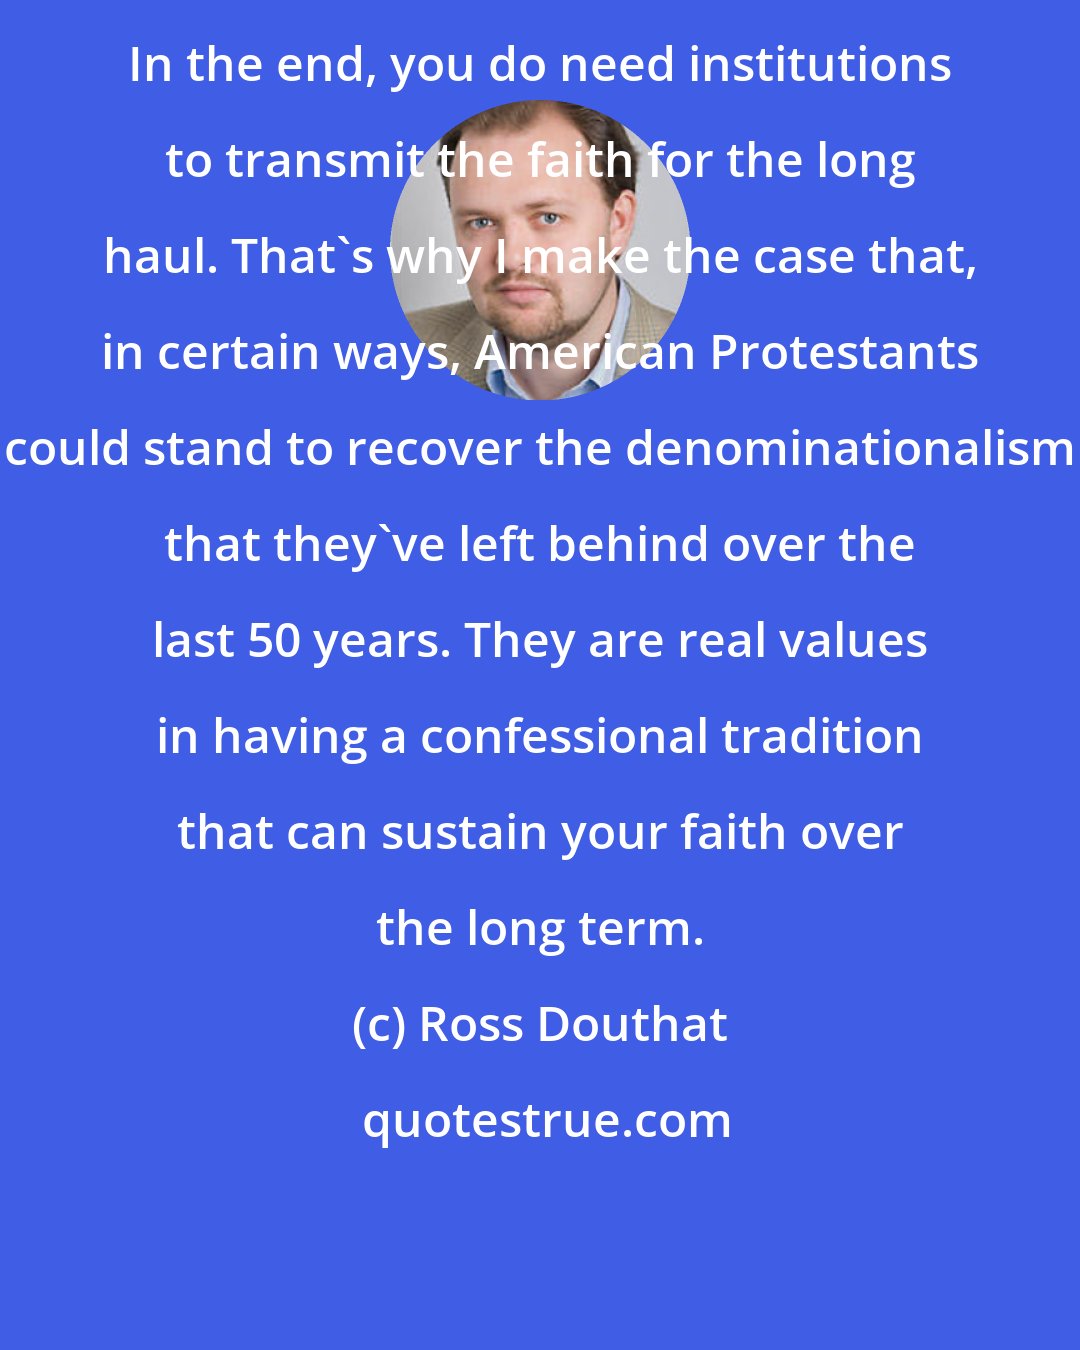 Ross Douthat: In the end, you do need institutions to transmit the faith for the long haul. That's why I make the case that, in certain ways, American Protestants could stand to recover the denominationalism that they've left behind over the last 50 years. They are real values in having a confessional tradition that can sustain your faith over the long term.